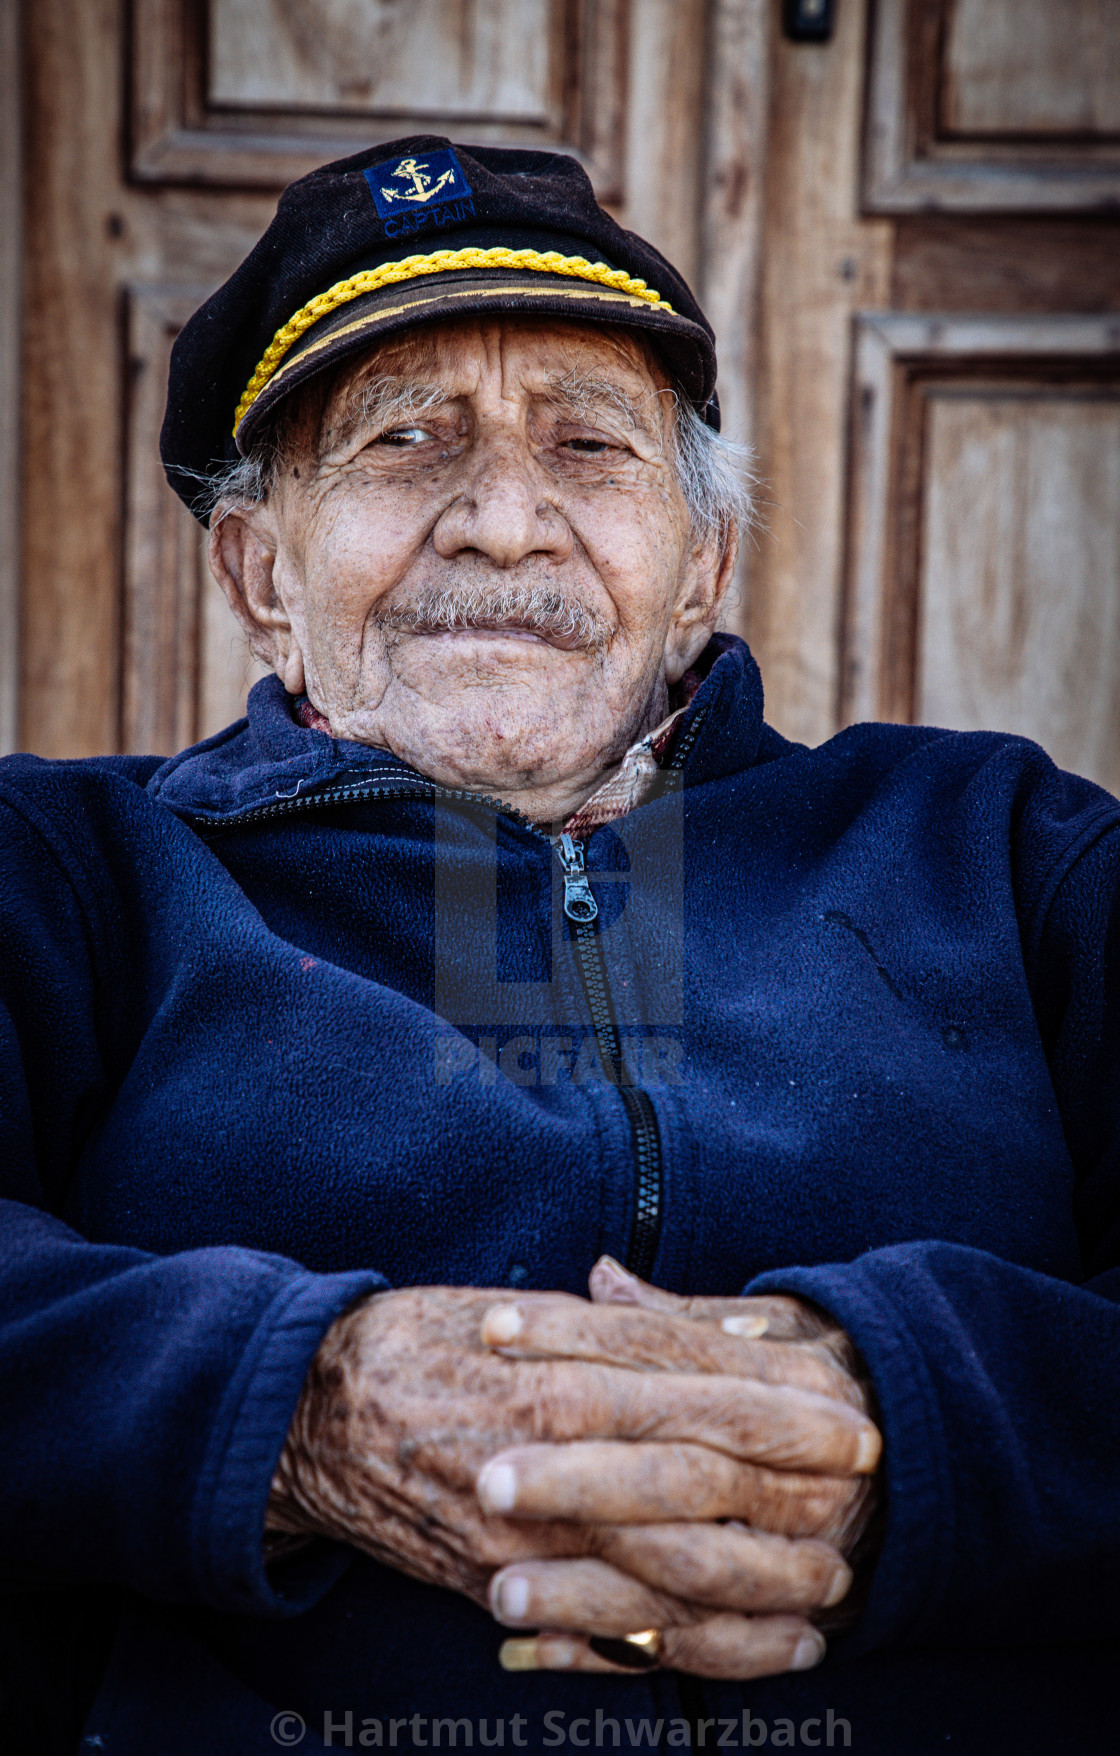 "Portrait of the old Captain, Nisyros, Insel der Dodekanes" stock image